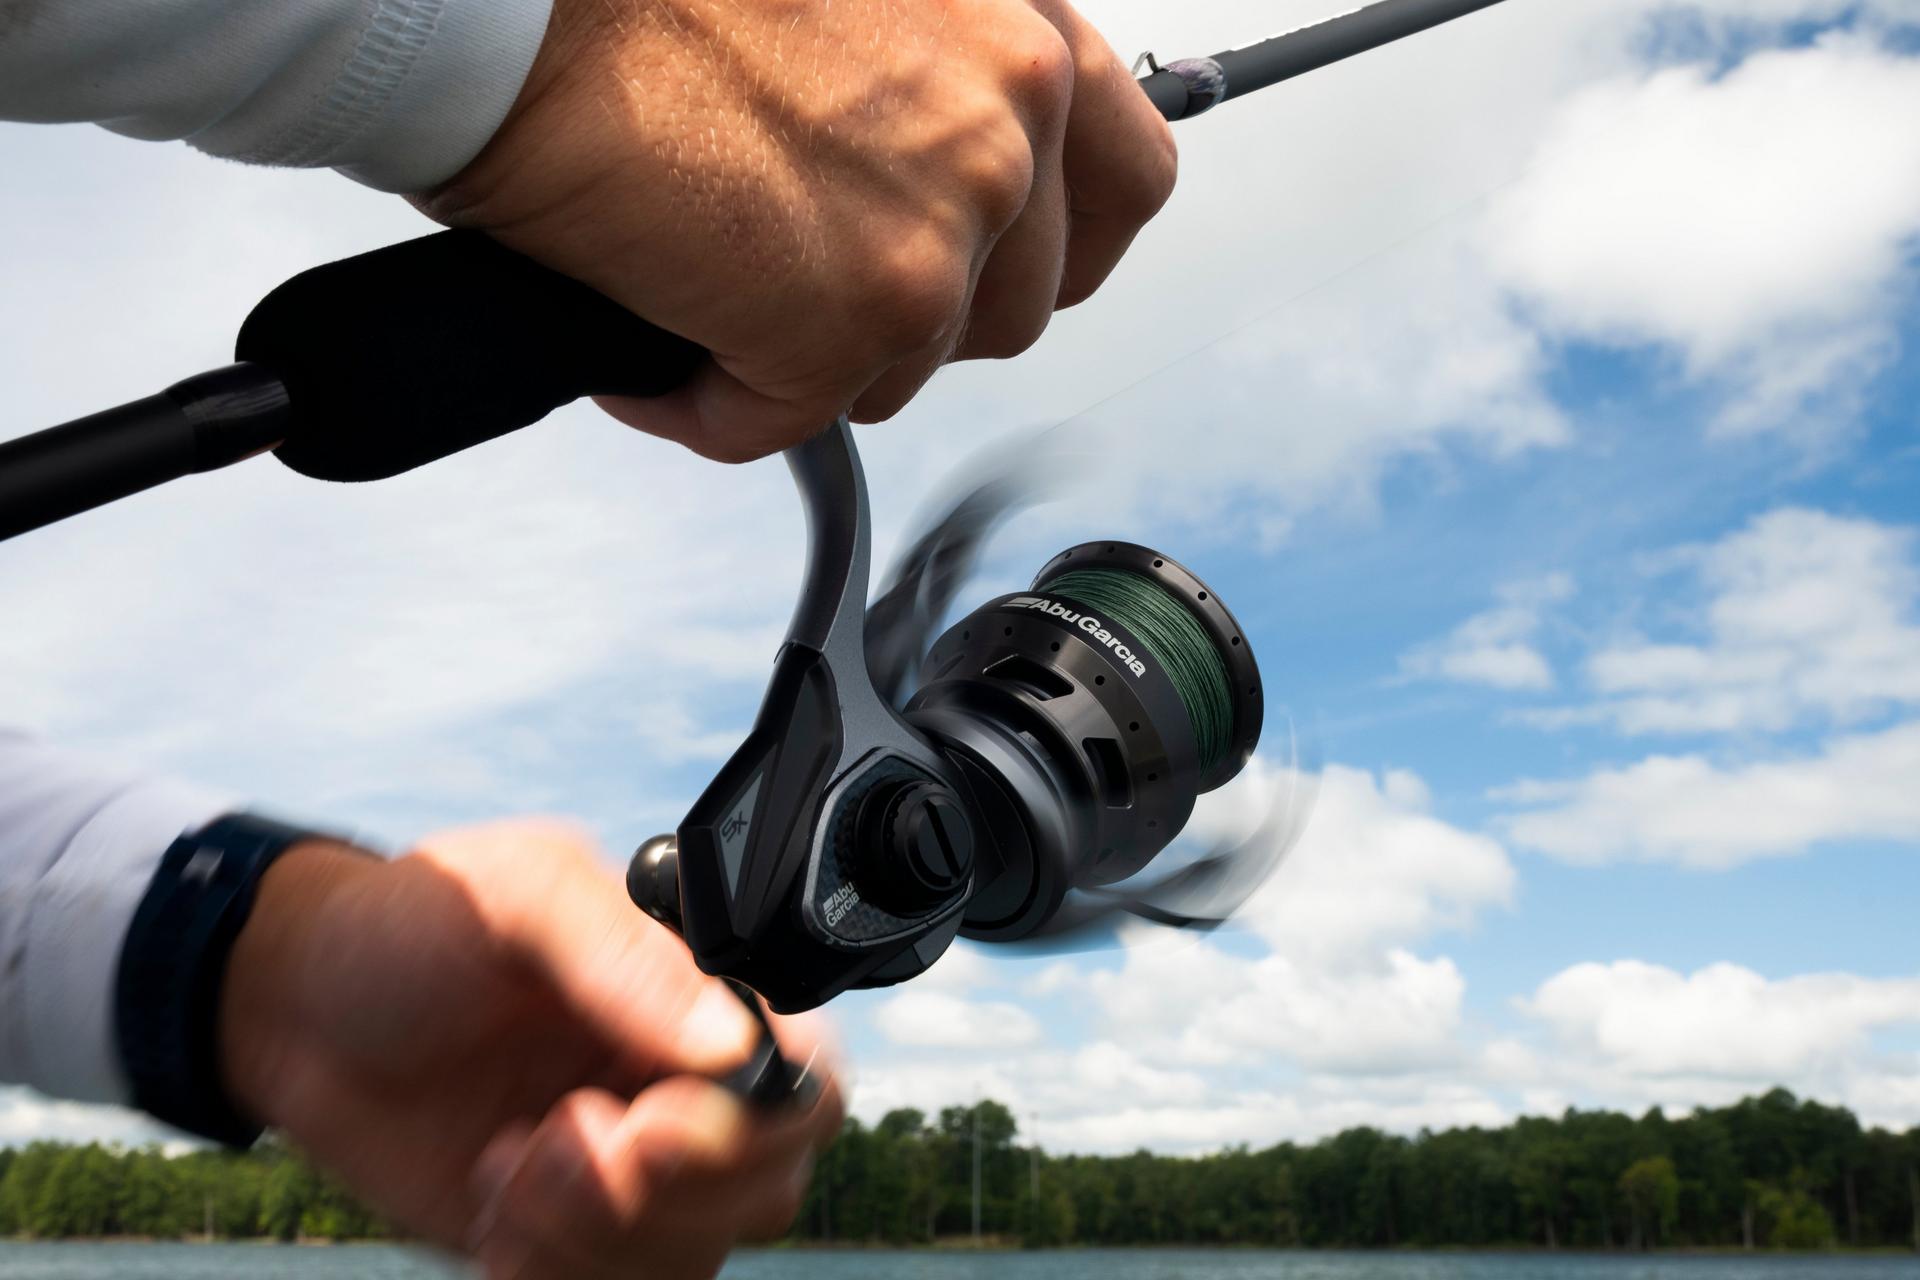 Abu Garcia Revo SX SP Spinning Reels: Built for Anglers Who Demand